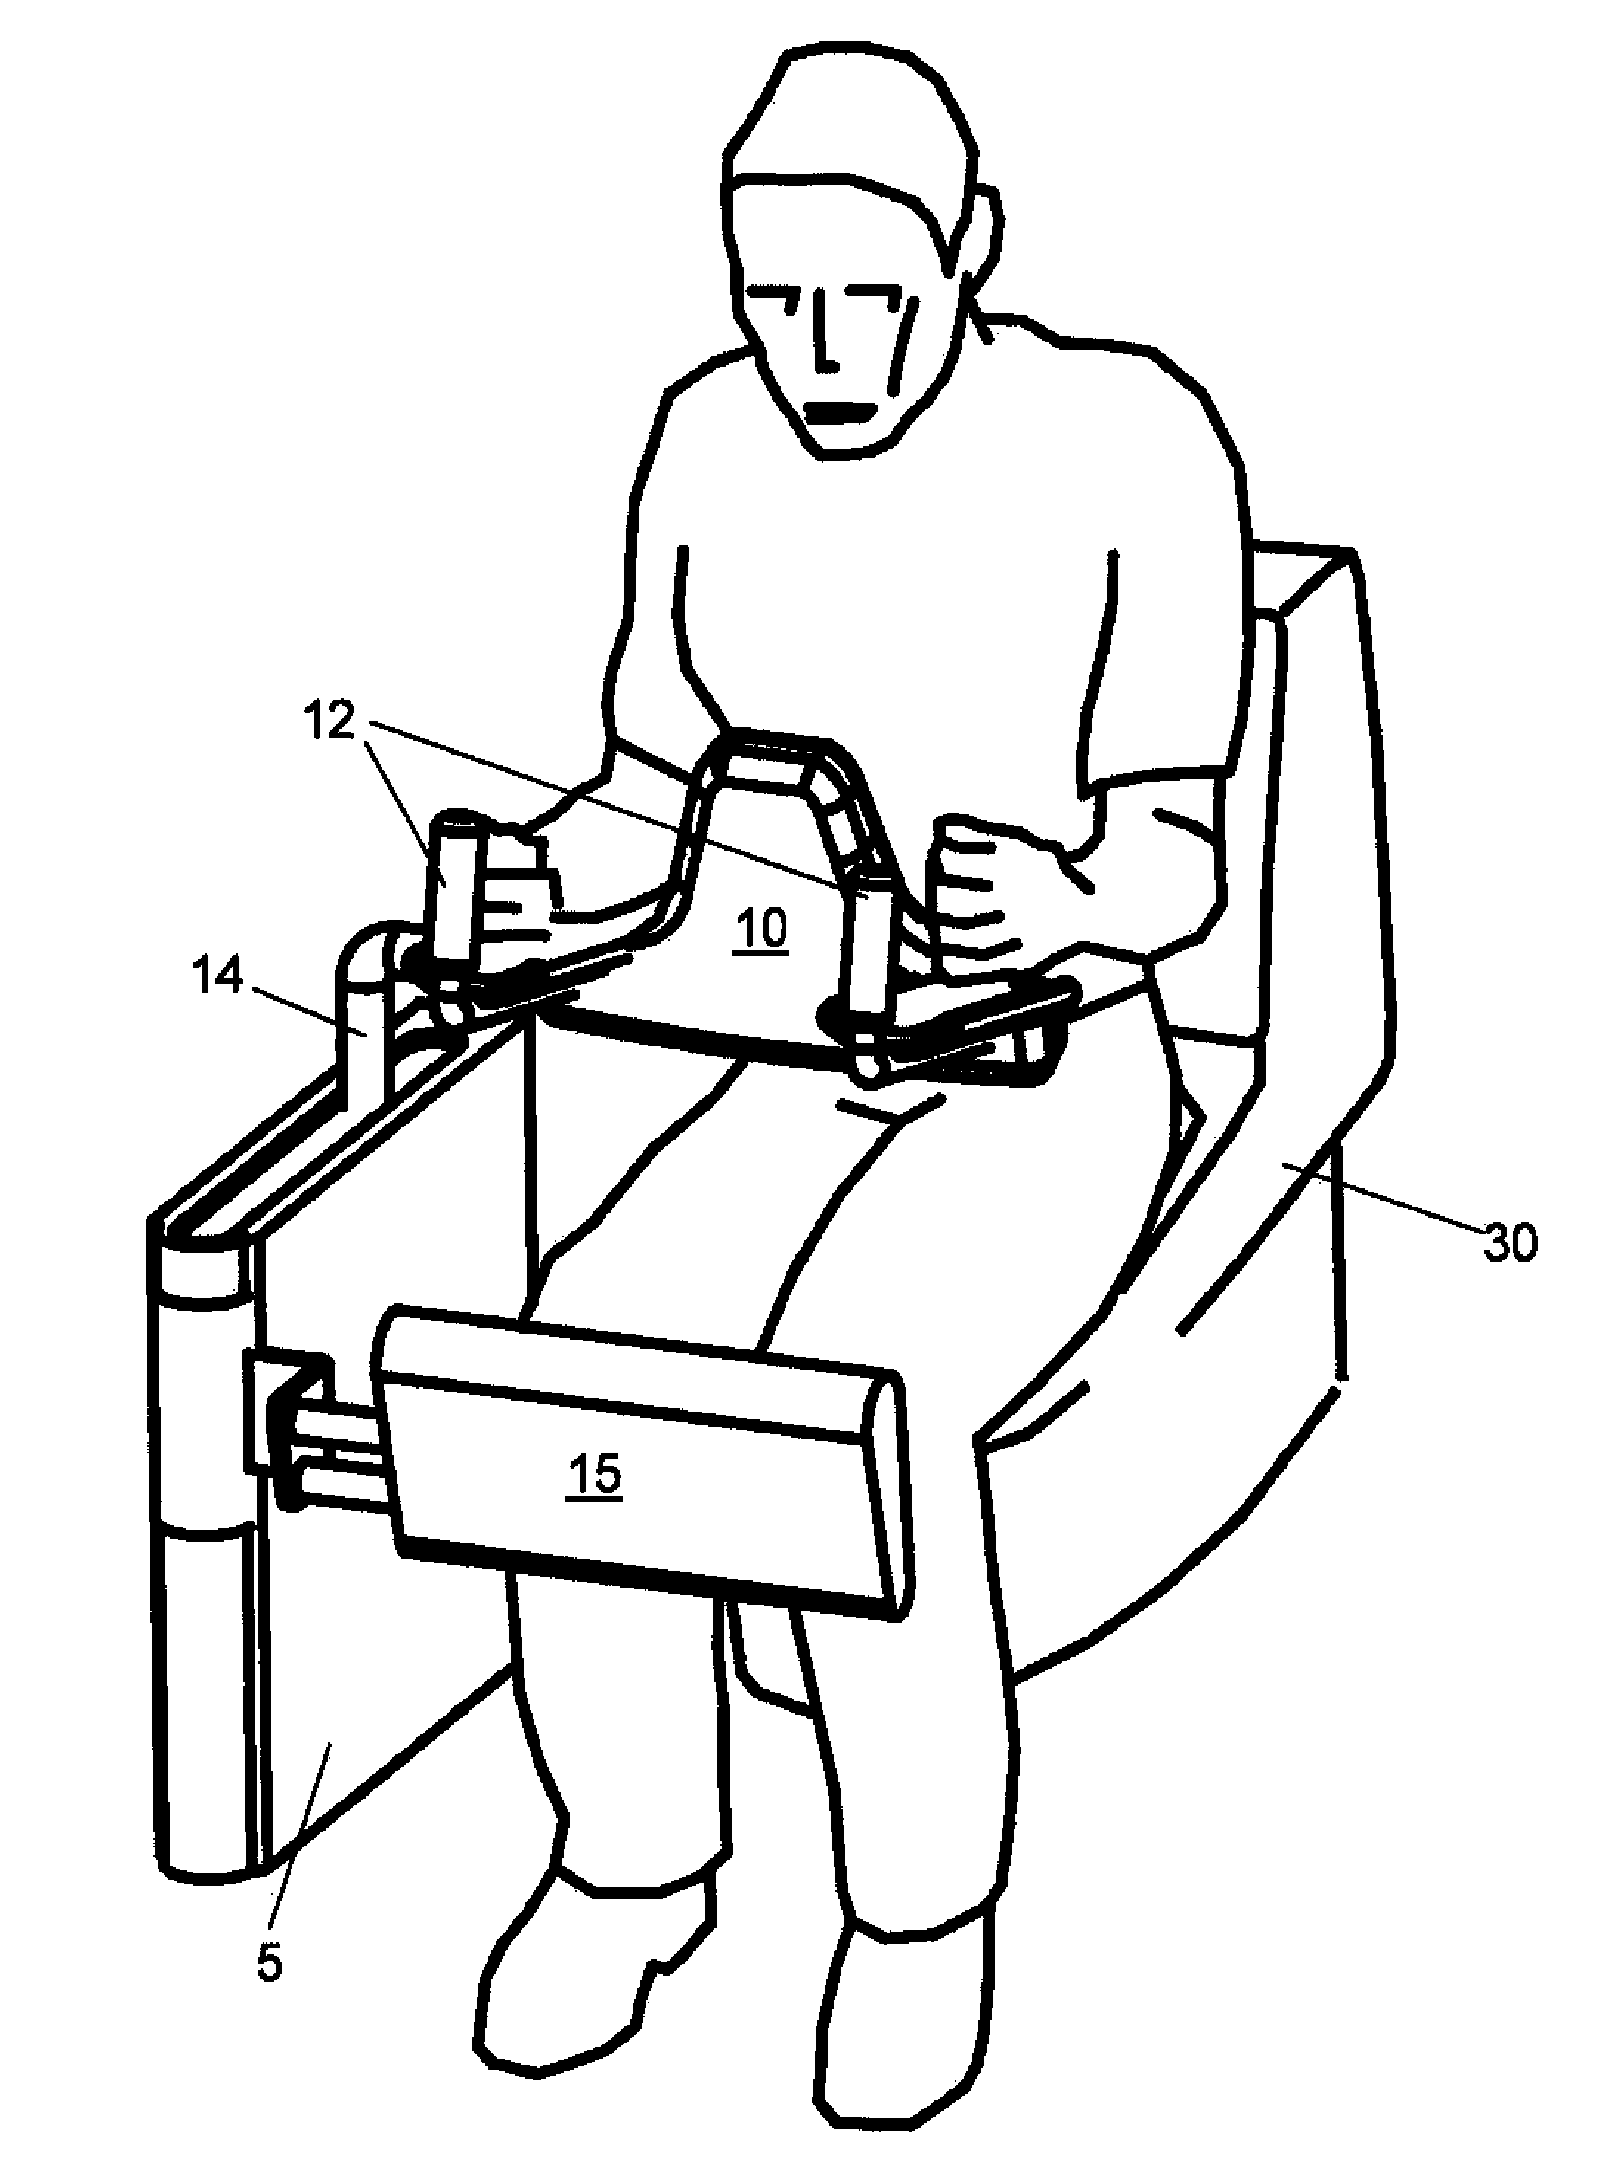 Device for assisting disabled persons